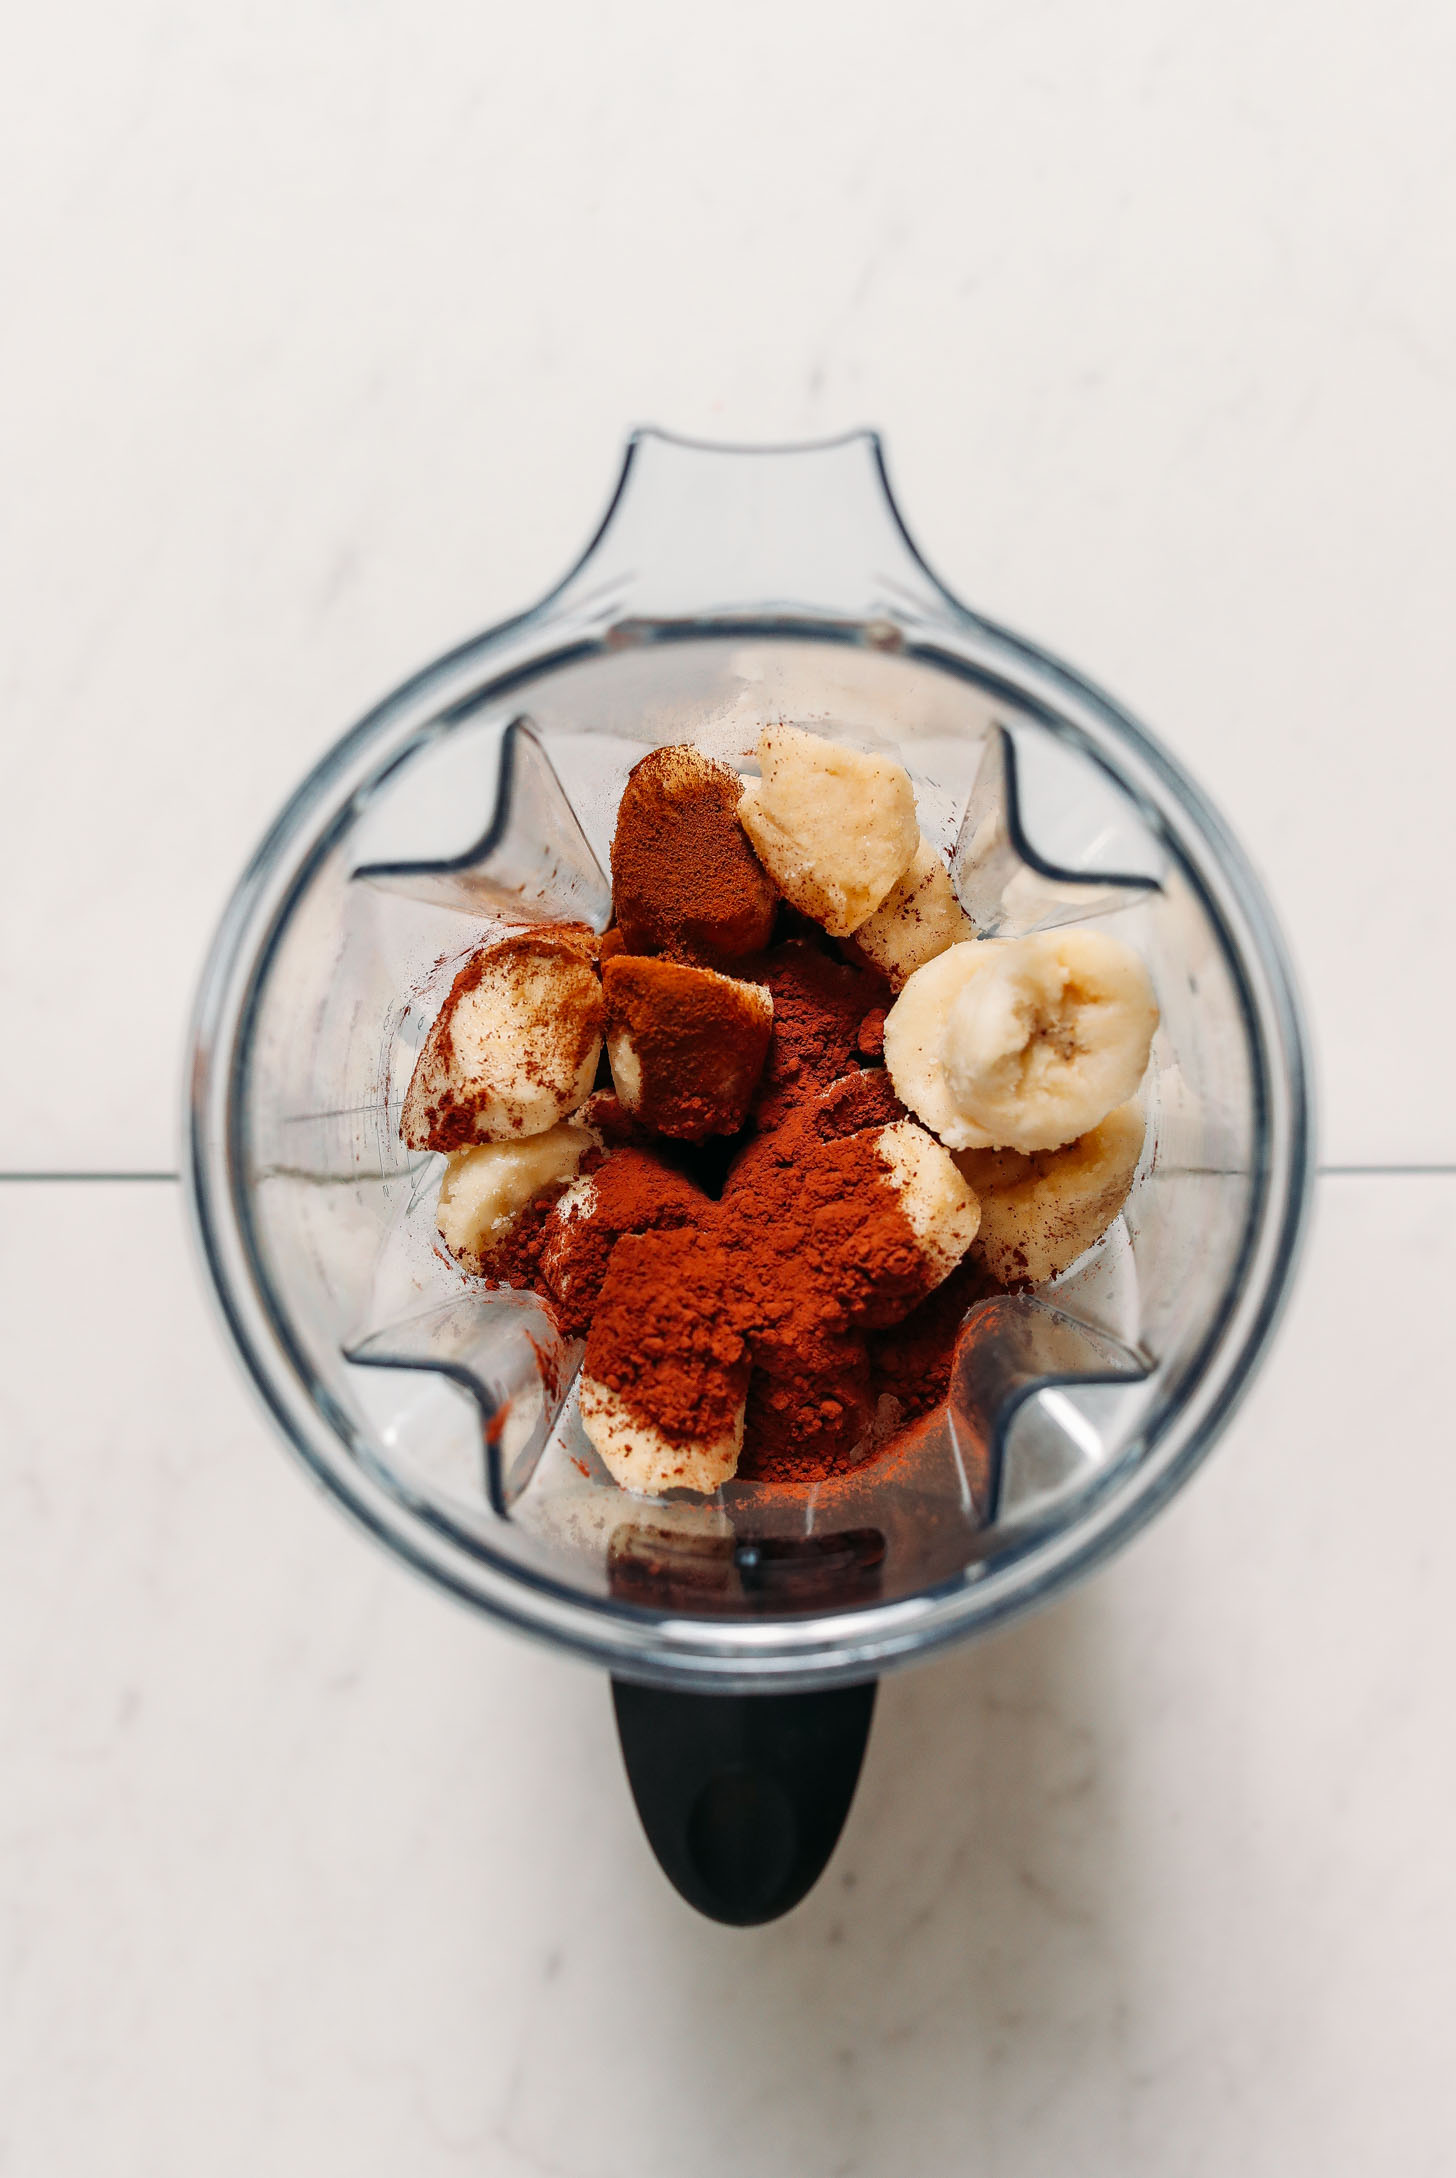 Sliced frozen bananas, cacao powder, and dandy blend in a Vitamix blender